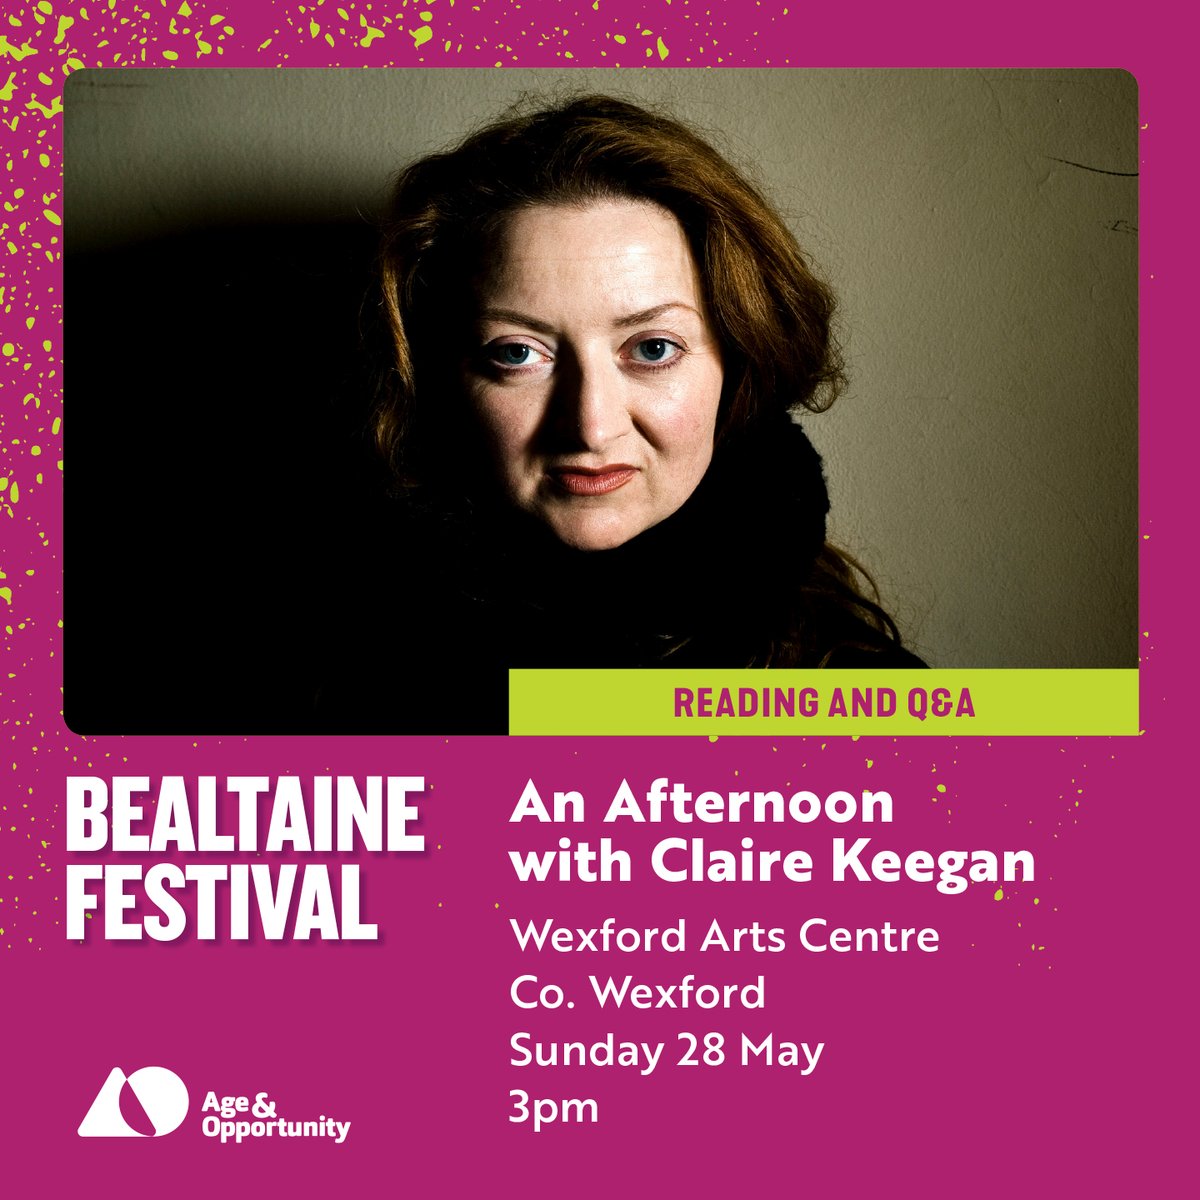 Sunday - 3 pm: Digging: An Afternoon with Claire Keegan, at Wexford Arts Centre. @wexfordarts @CormacKinsella @artscouncil_ie @poetryireland @Age_Opp @HSELive @artscouncil_ie @Wexford_People @wexlibraries bealtaine.ie/bealtaine-even…